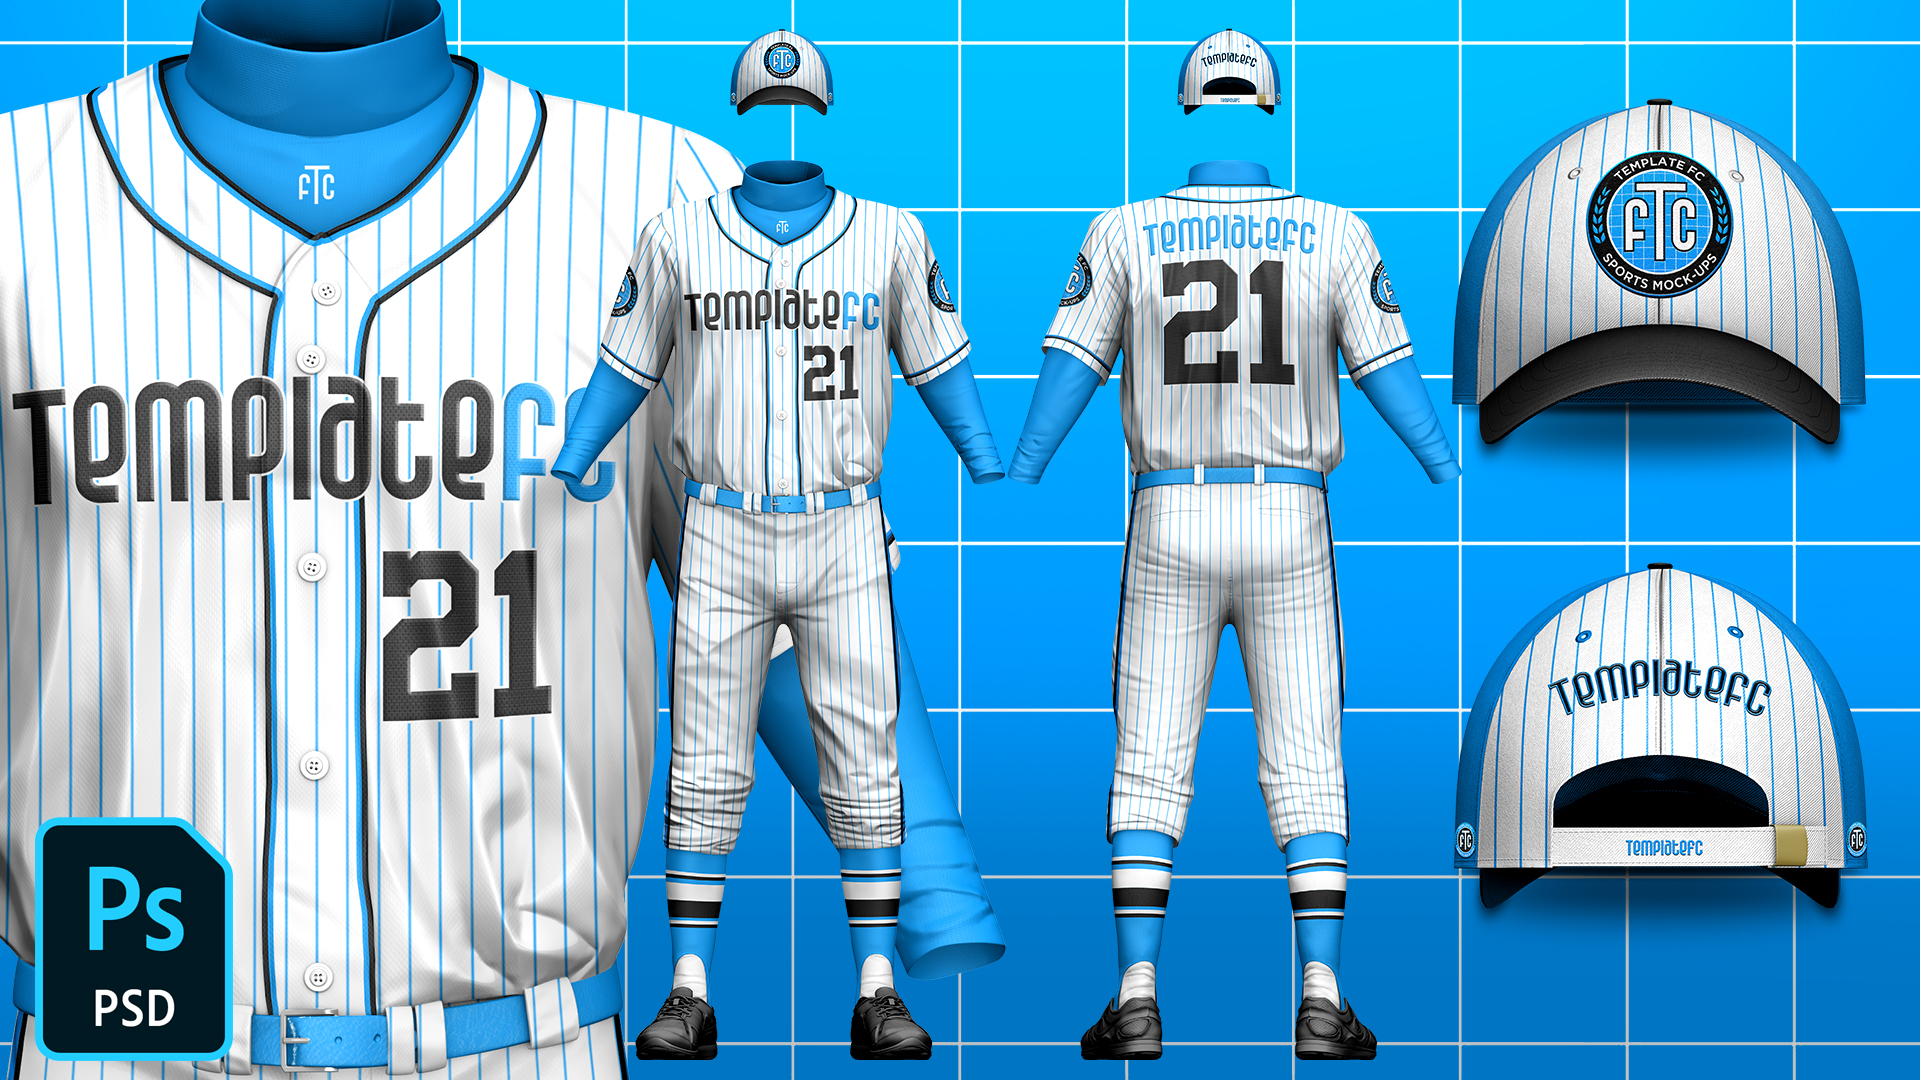 Baseball Jersey Template - Free Vectors & PSDs to Download